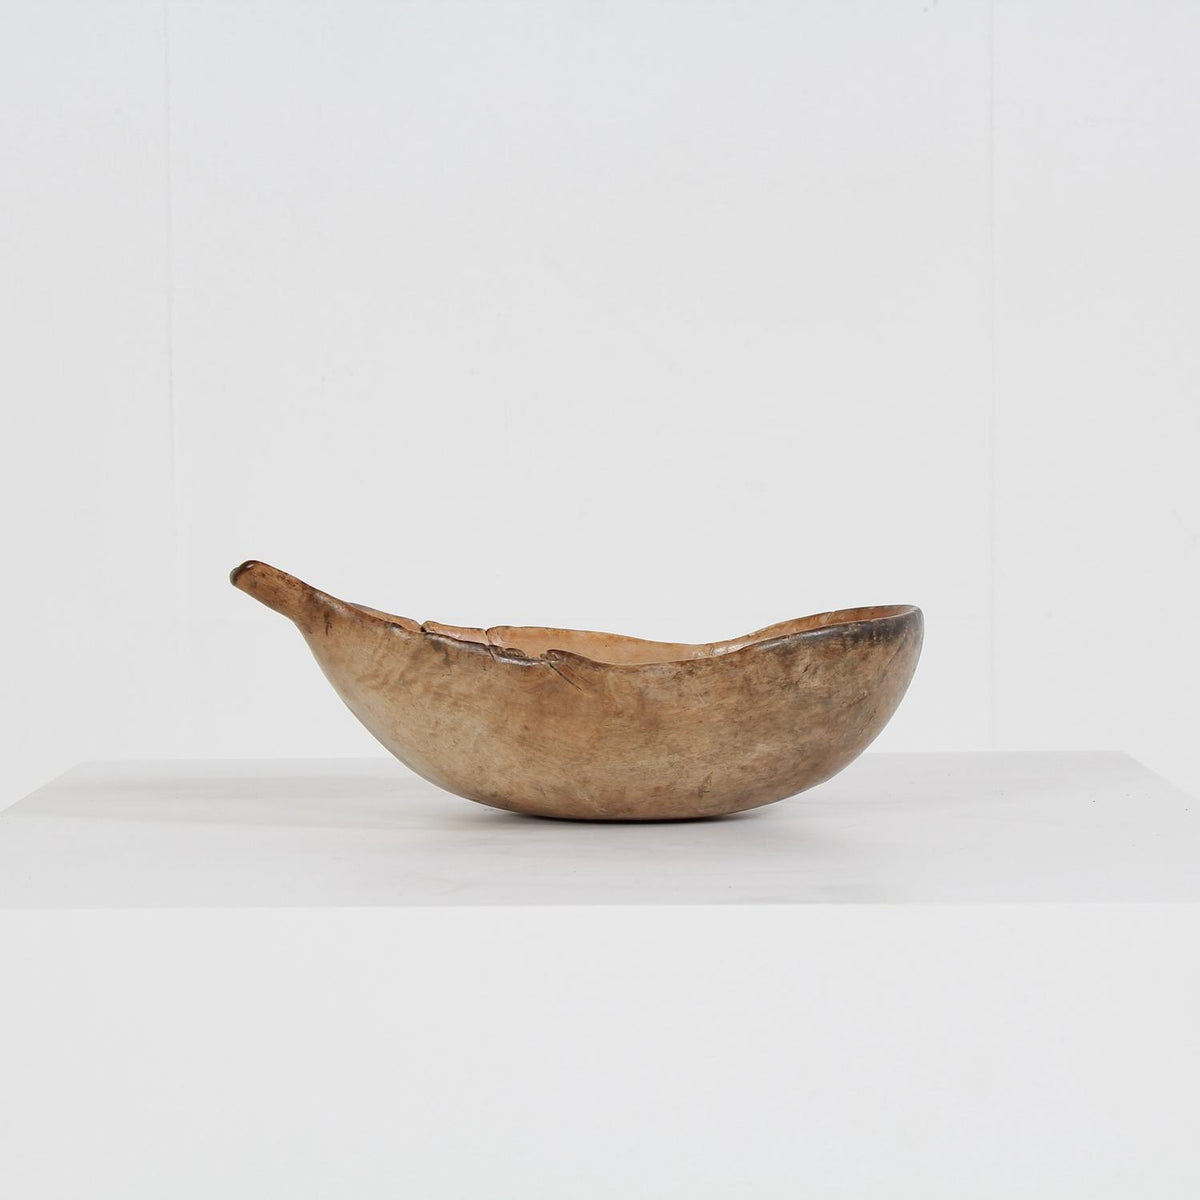 A Very Rare Swedish Organic 19thC Spouted Root Bowl